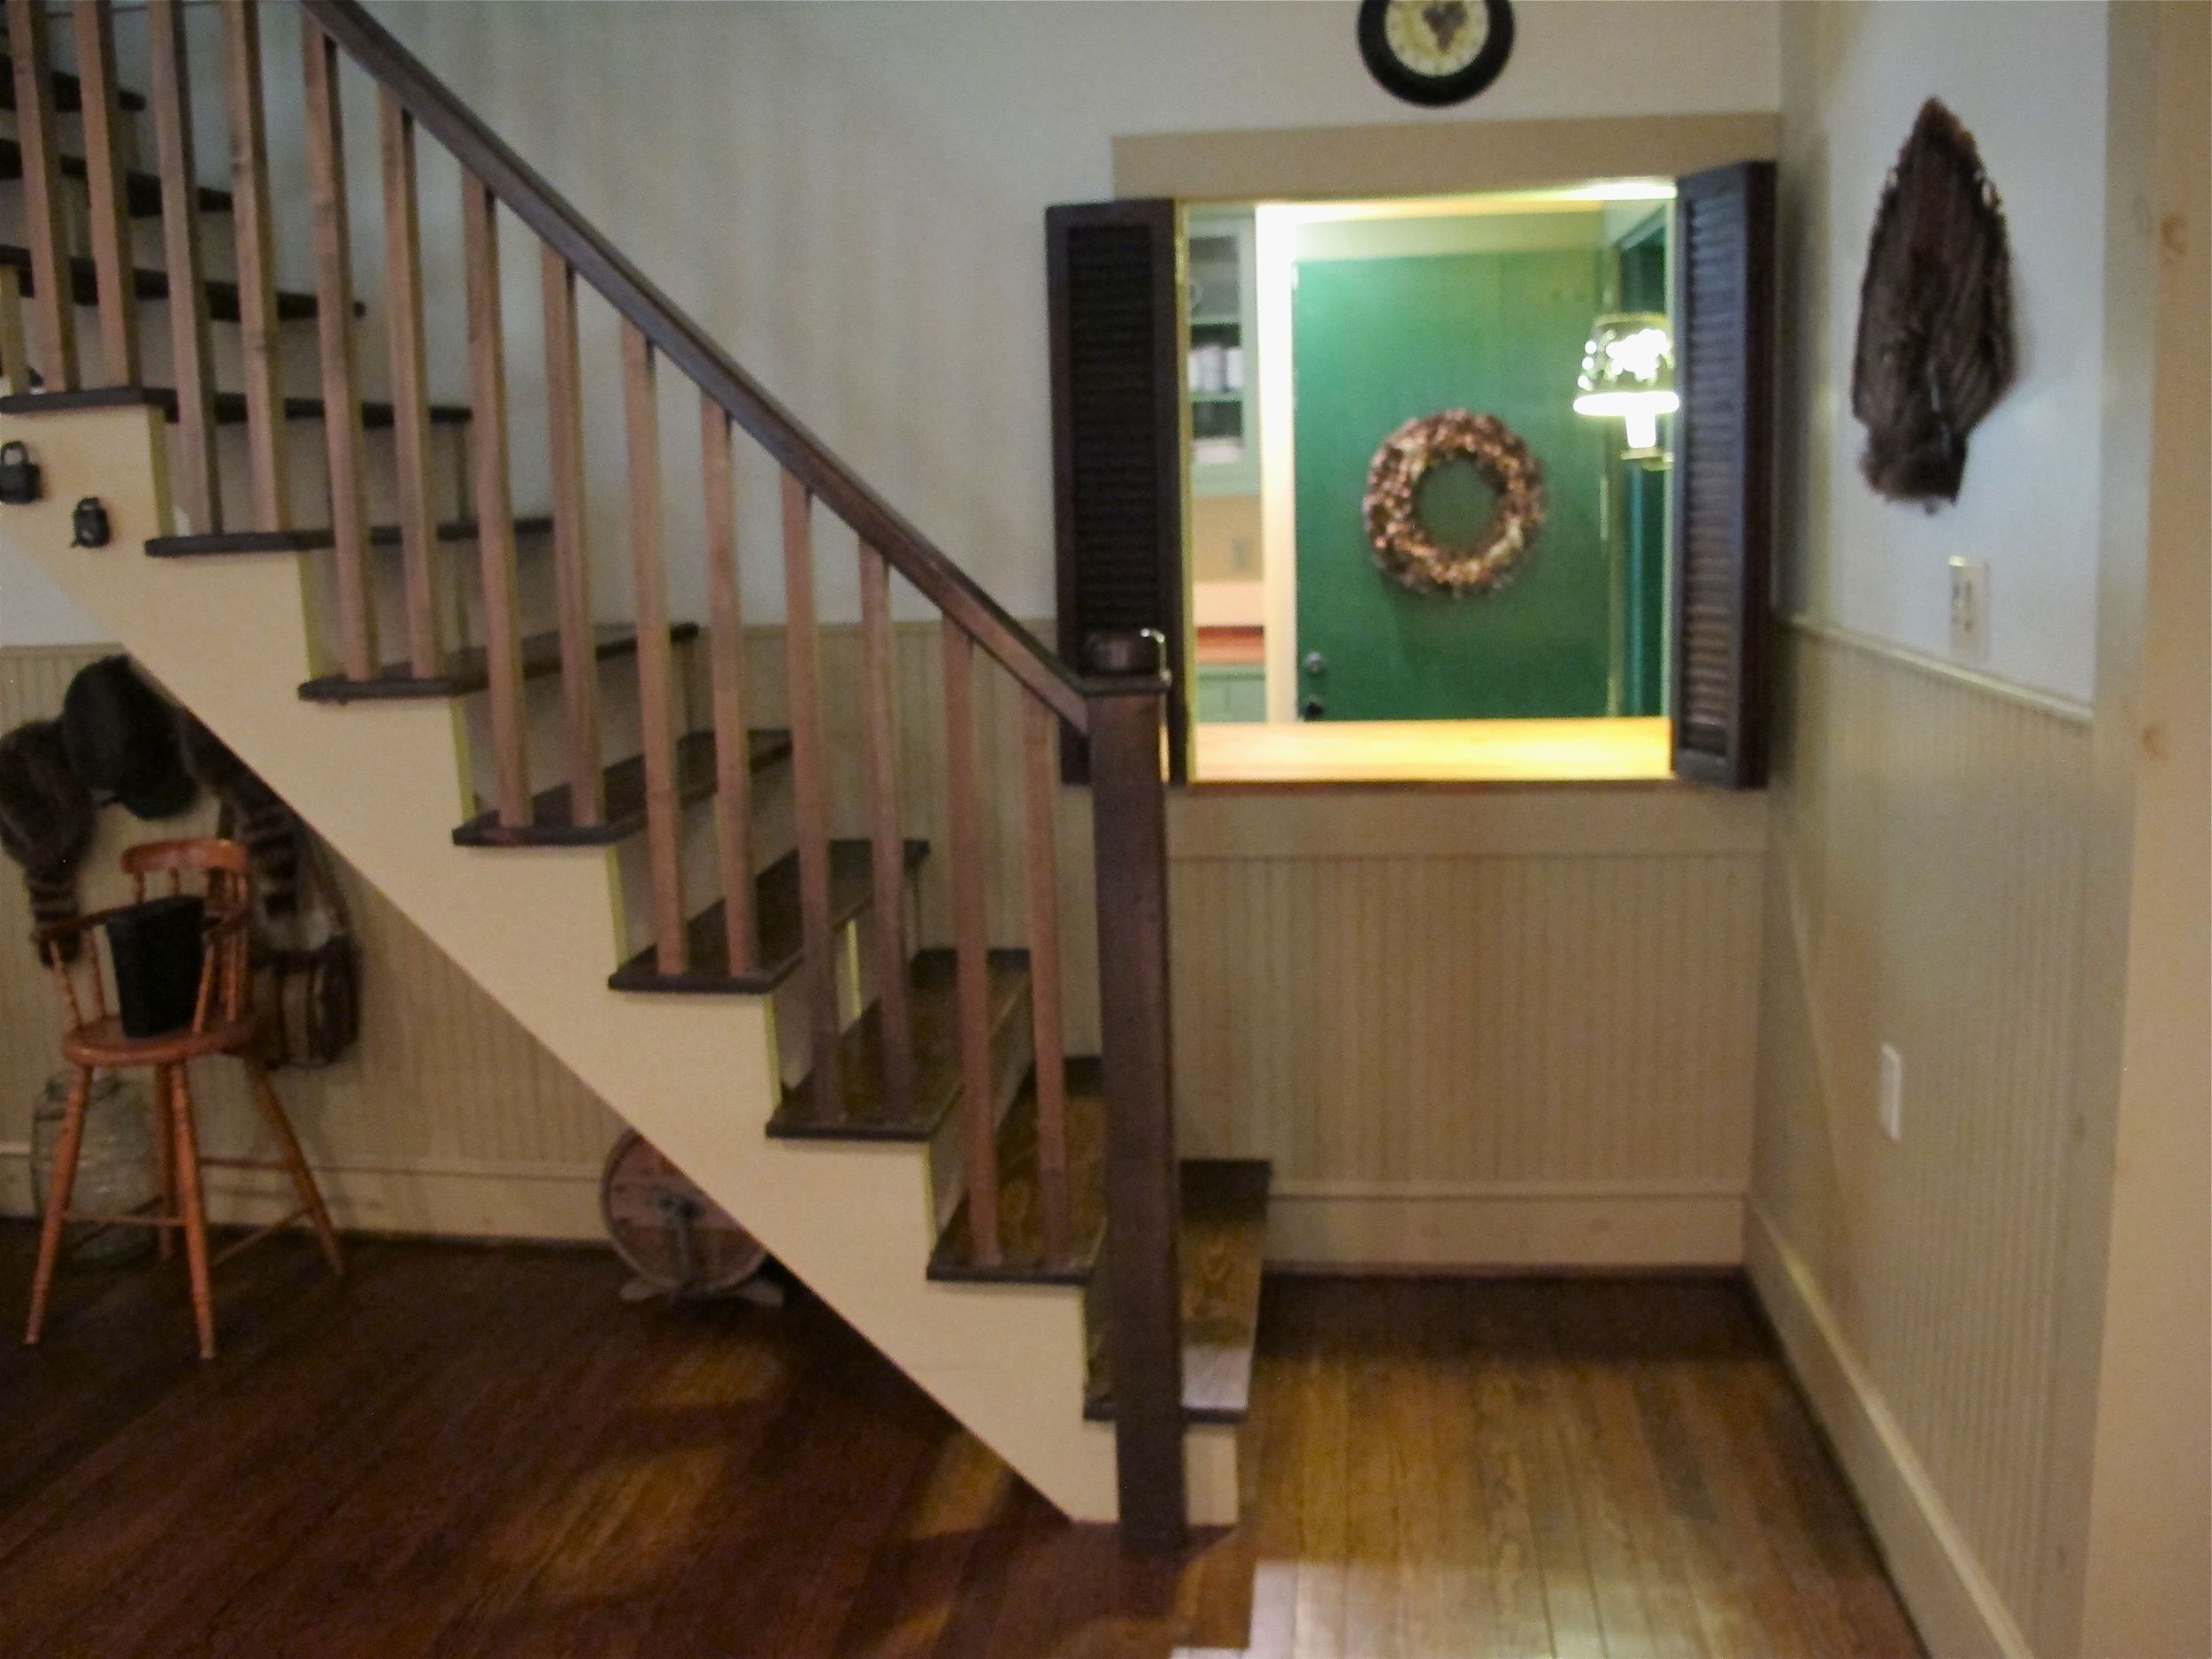 Stair Case to Second Floor